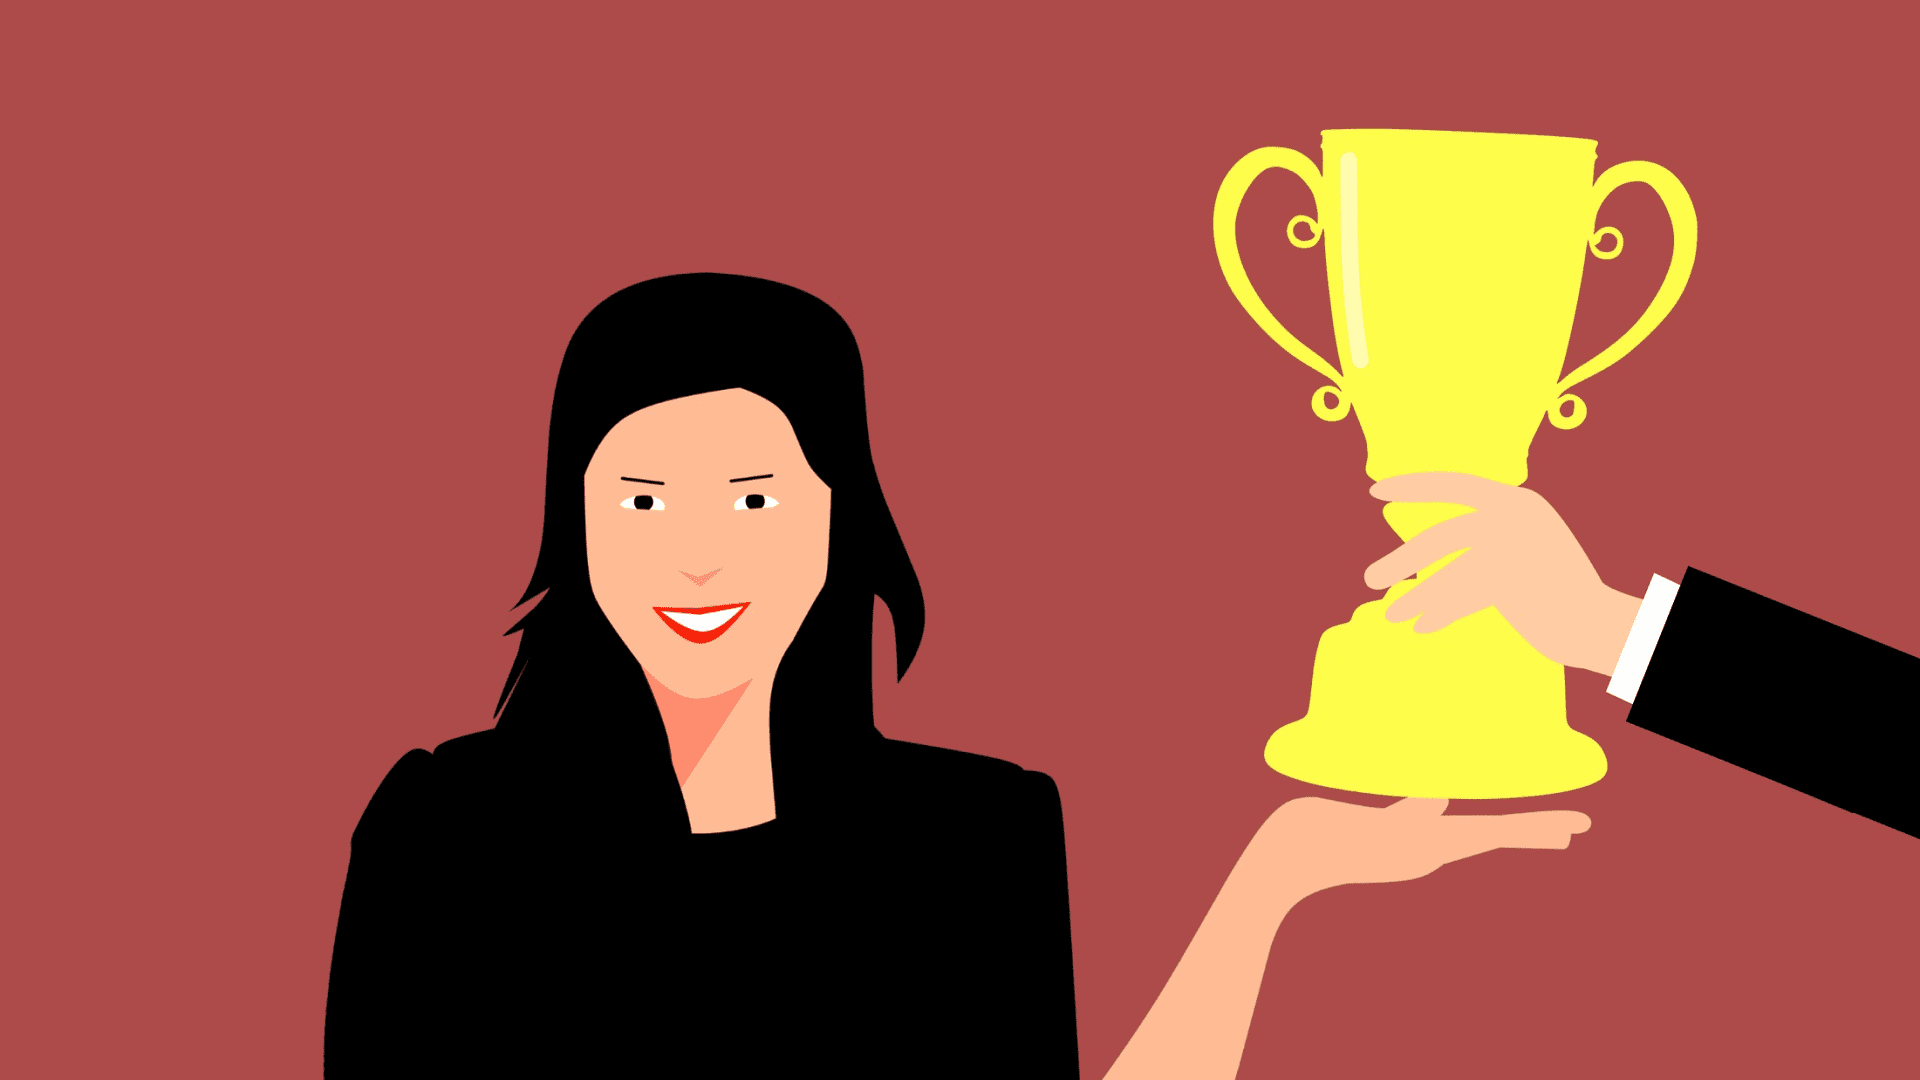 Illustration of a woman receiving a trophy